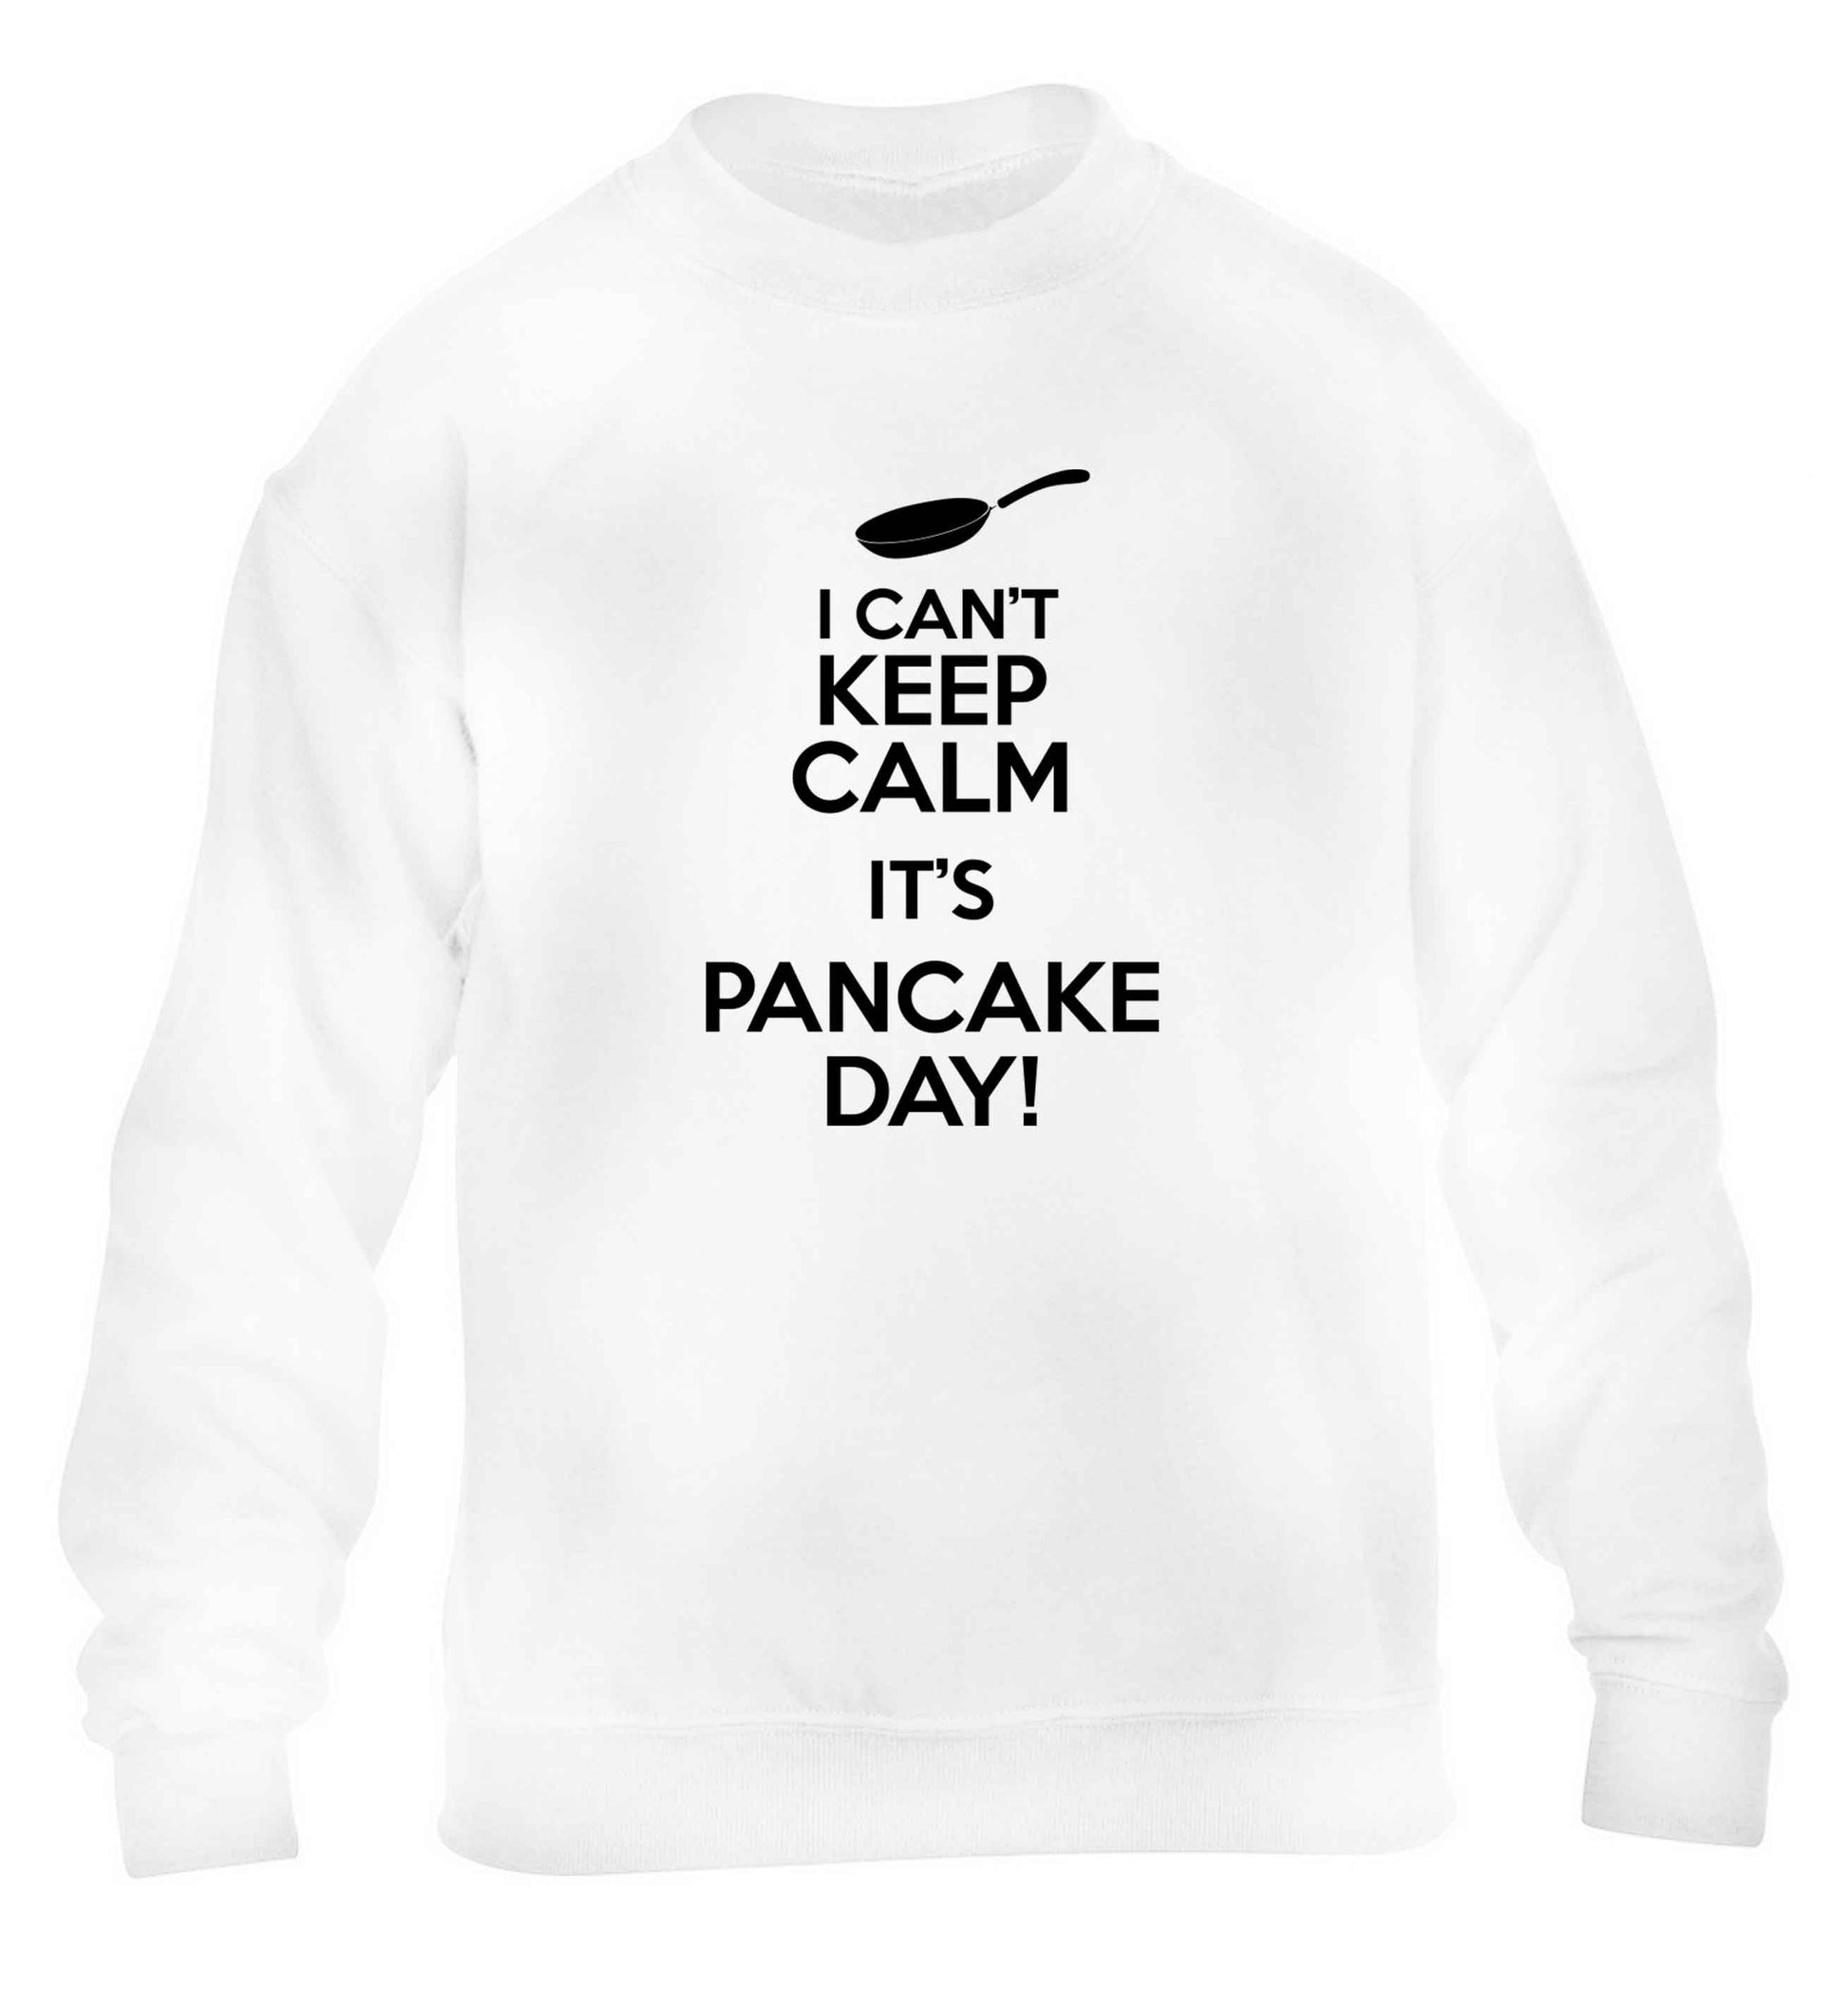 I can't keep calm it's pancake day! children's white sweater 12-13 Years